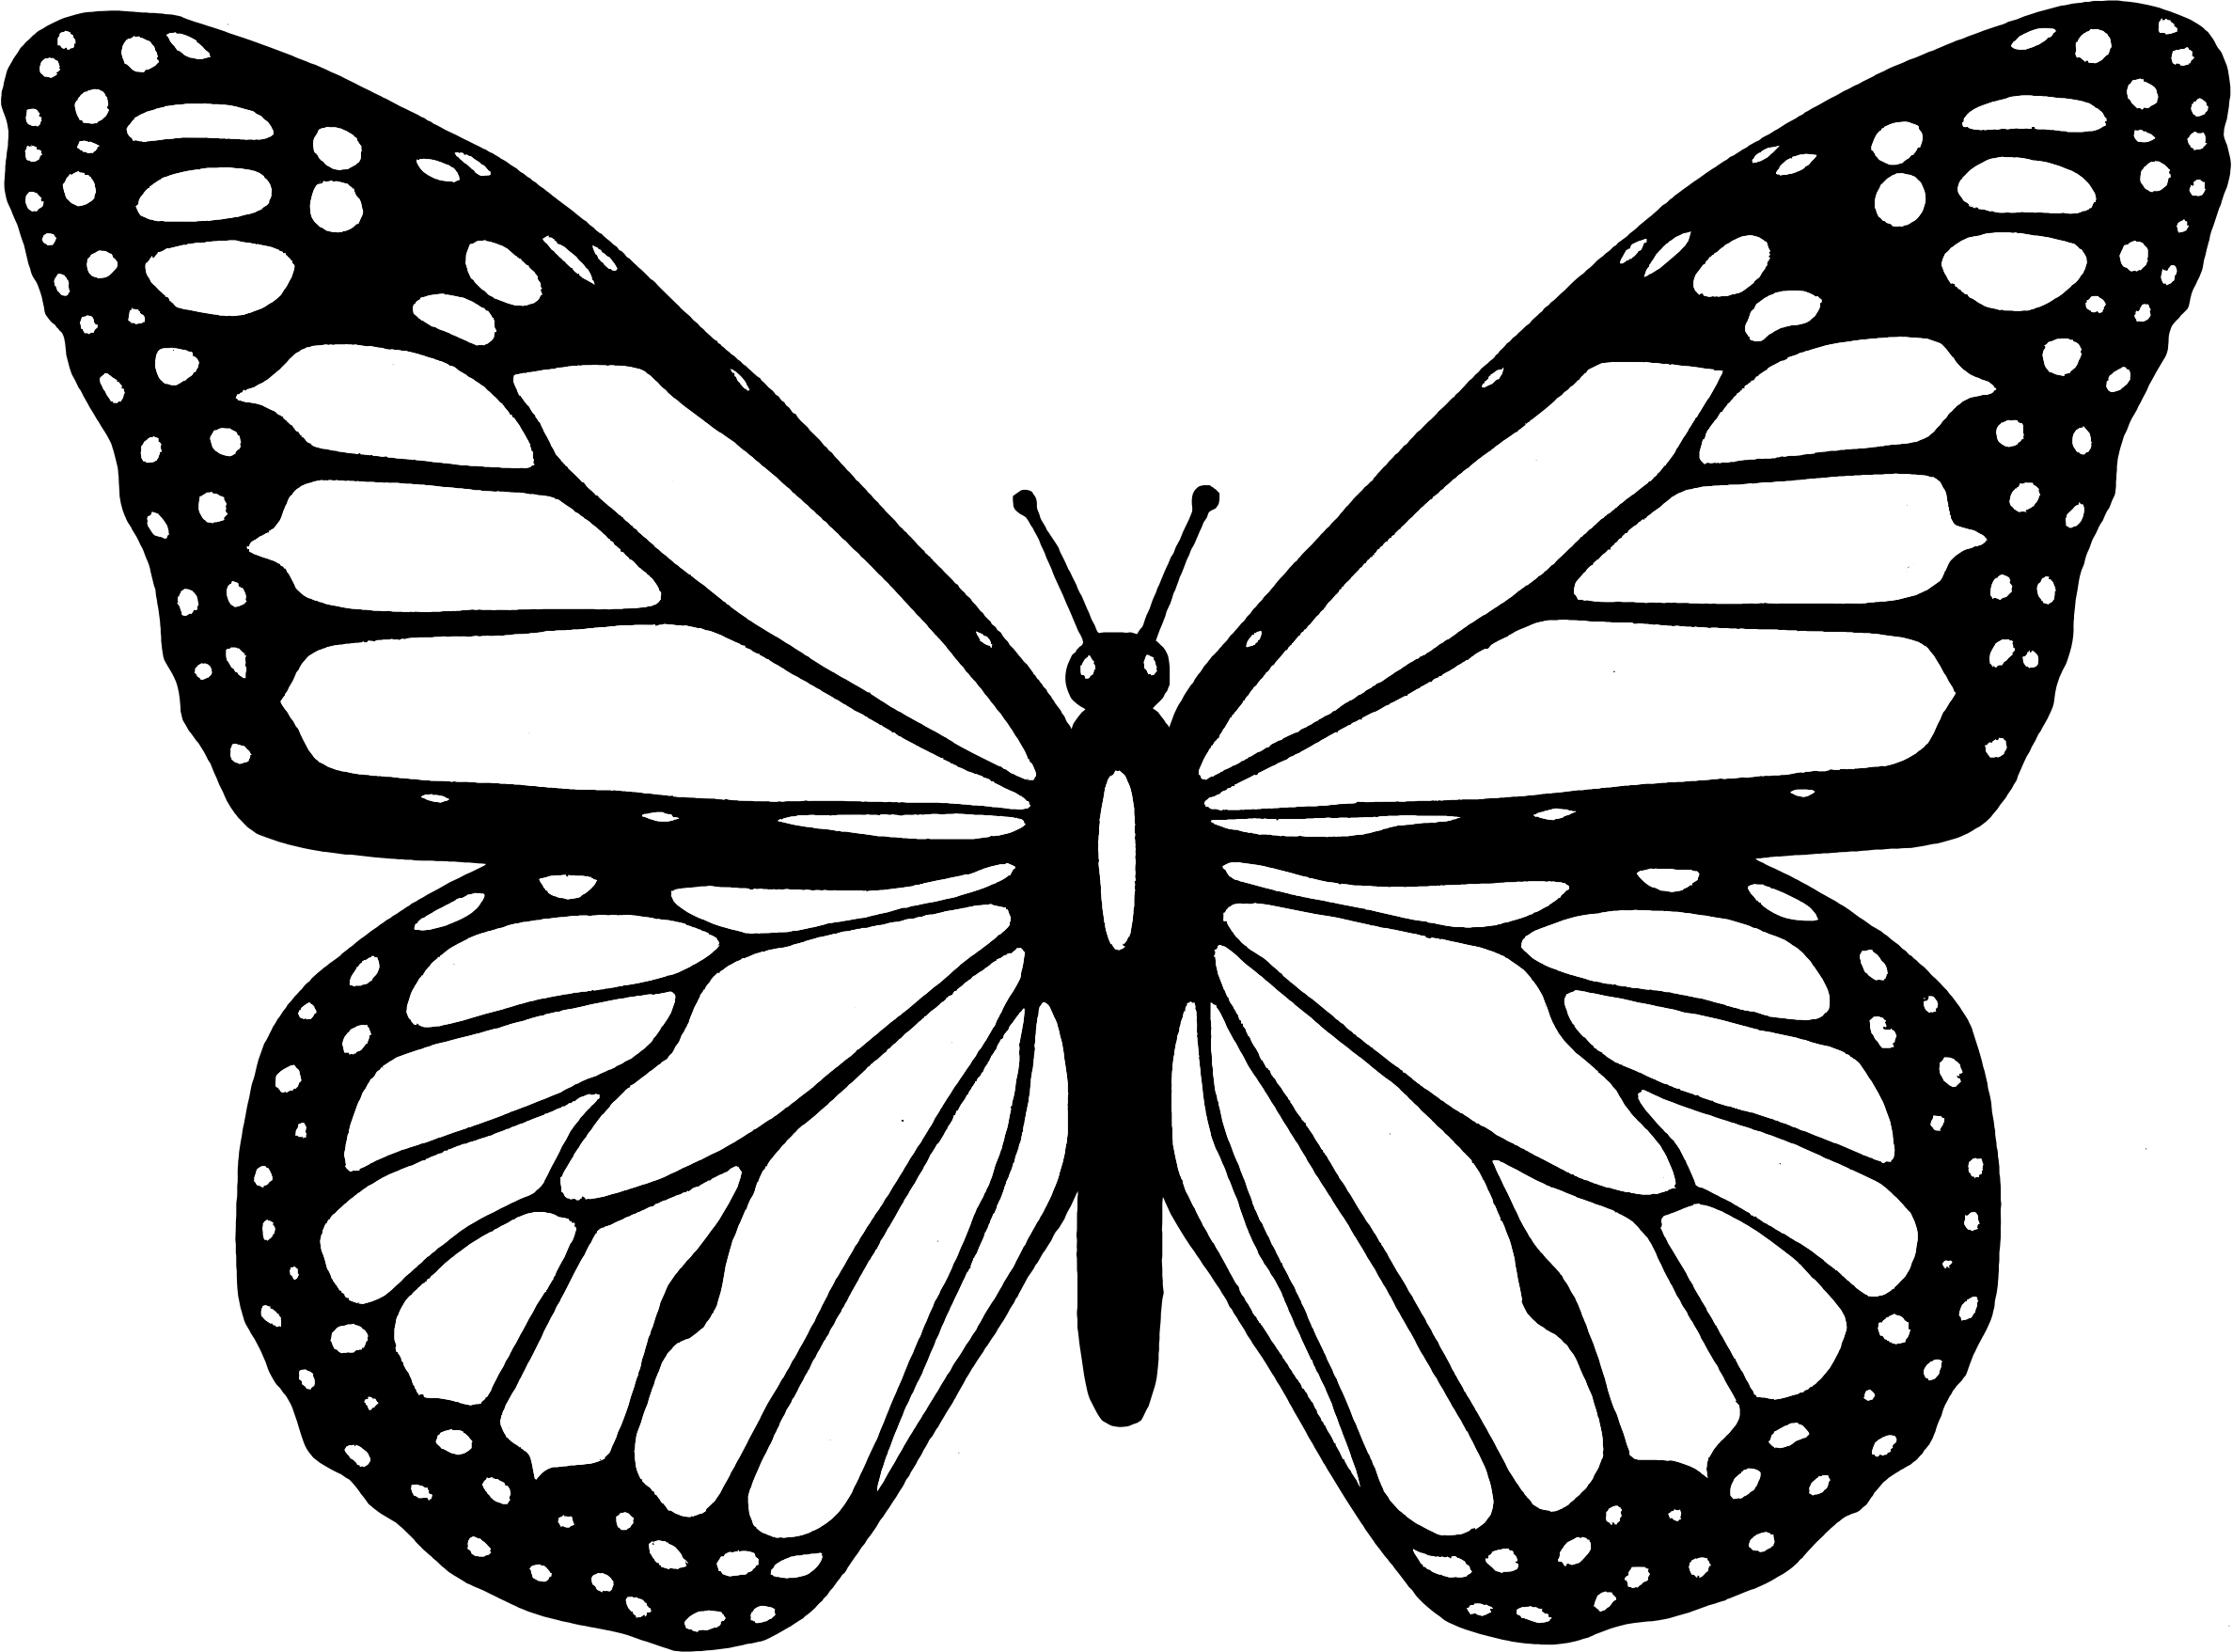 Big Image (Png) - Art Black And White, Transparent background PNG HD thumbnail